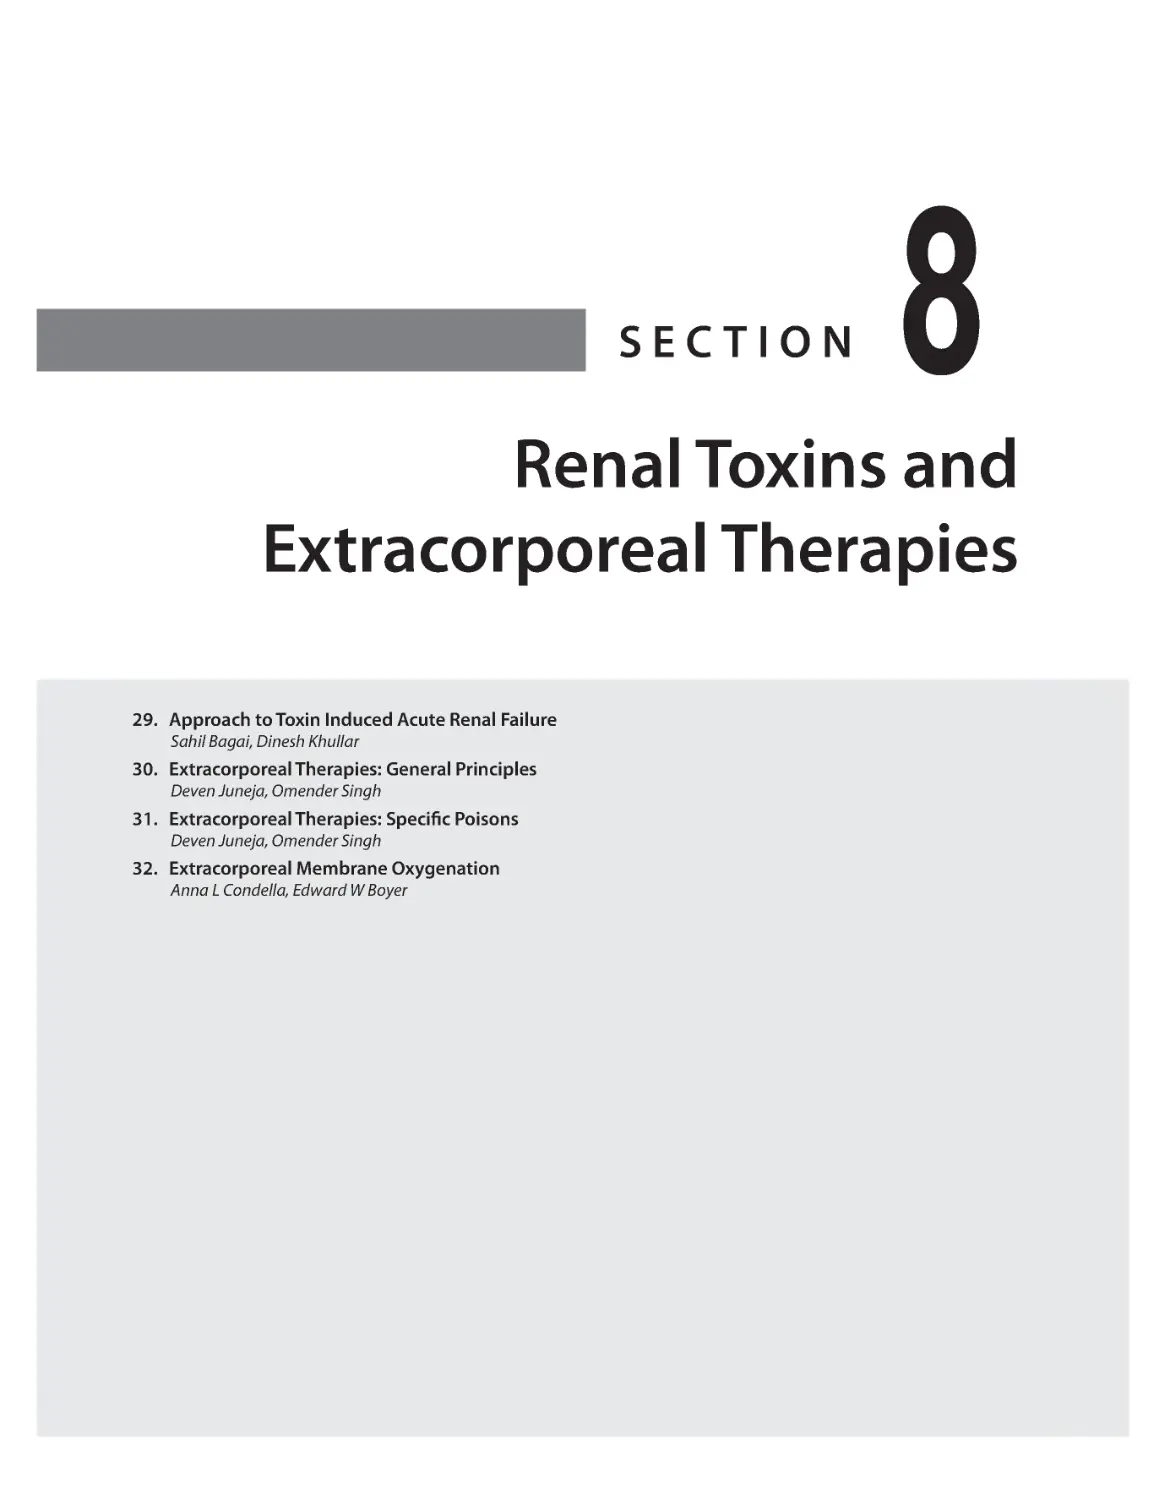 SECTION 8: Renal Toxins and Extracorporeal Therapies